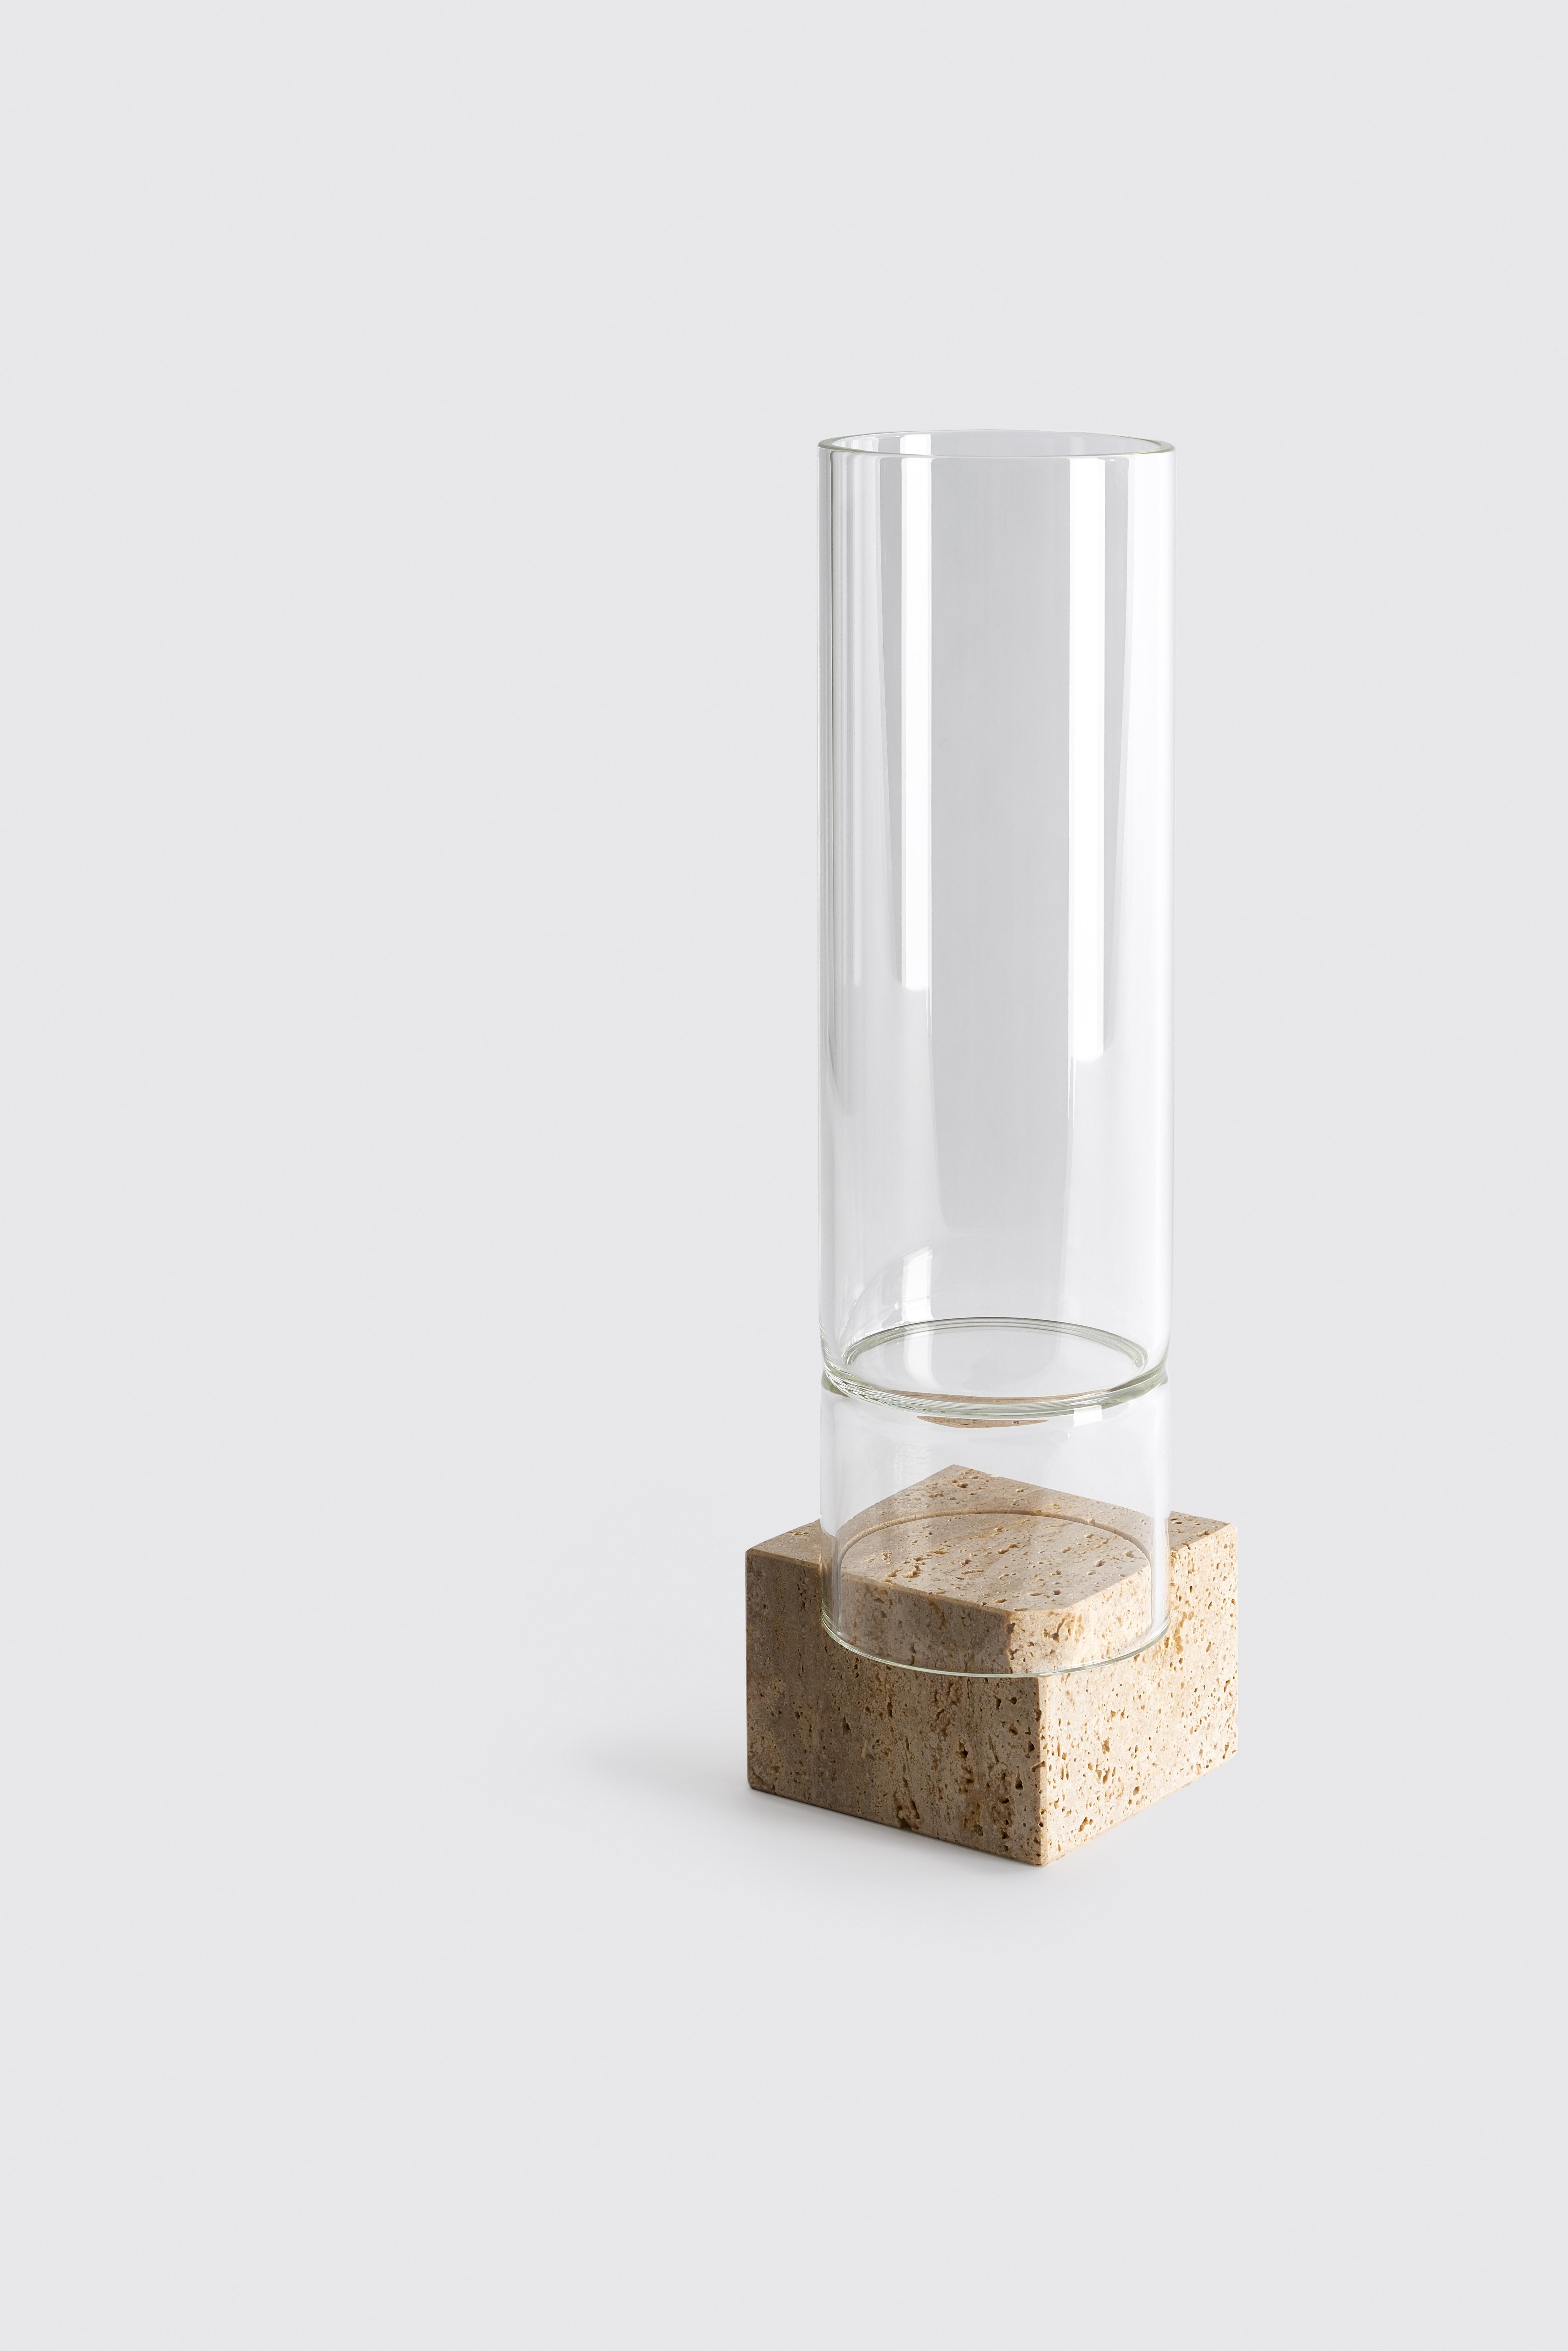 Segno vase I - Giorgio Bonaguro
Dimensions: D 12 x W 12 x H 44 cm
Materials: Travertine, glass.

A collection that was born from the desire to recover marble processing waste: small portions of slabs with different thickness, otherwise unused,